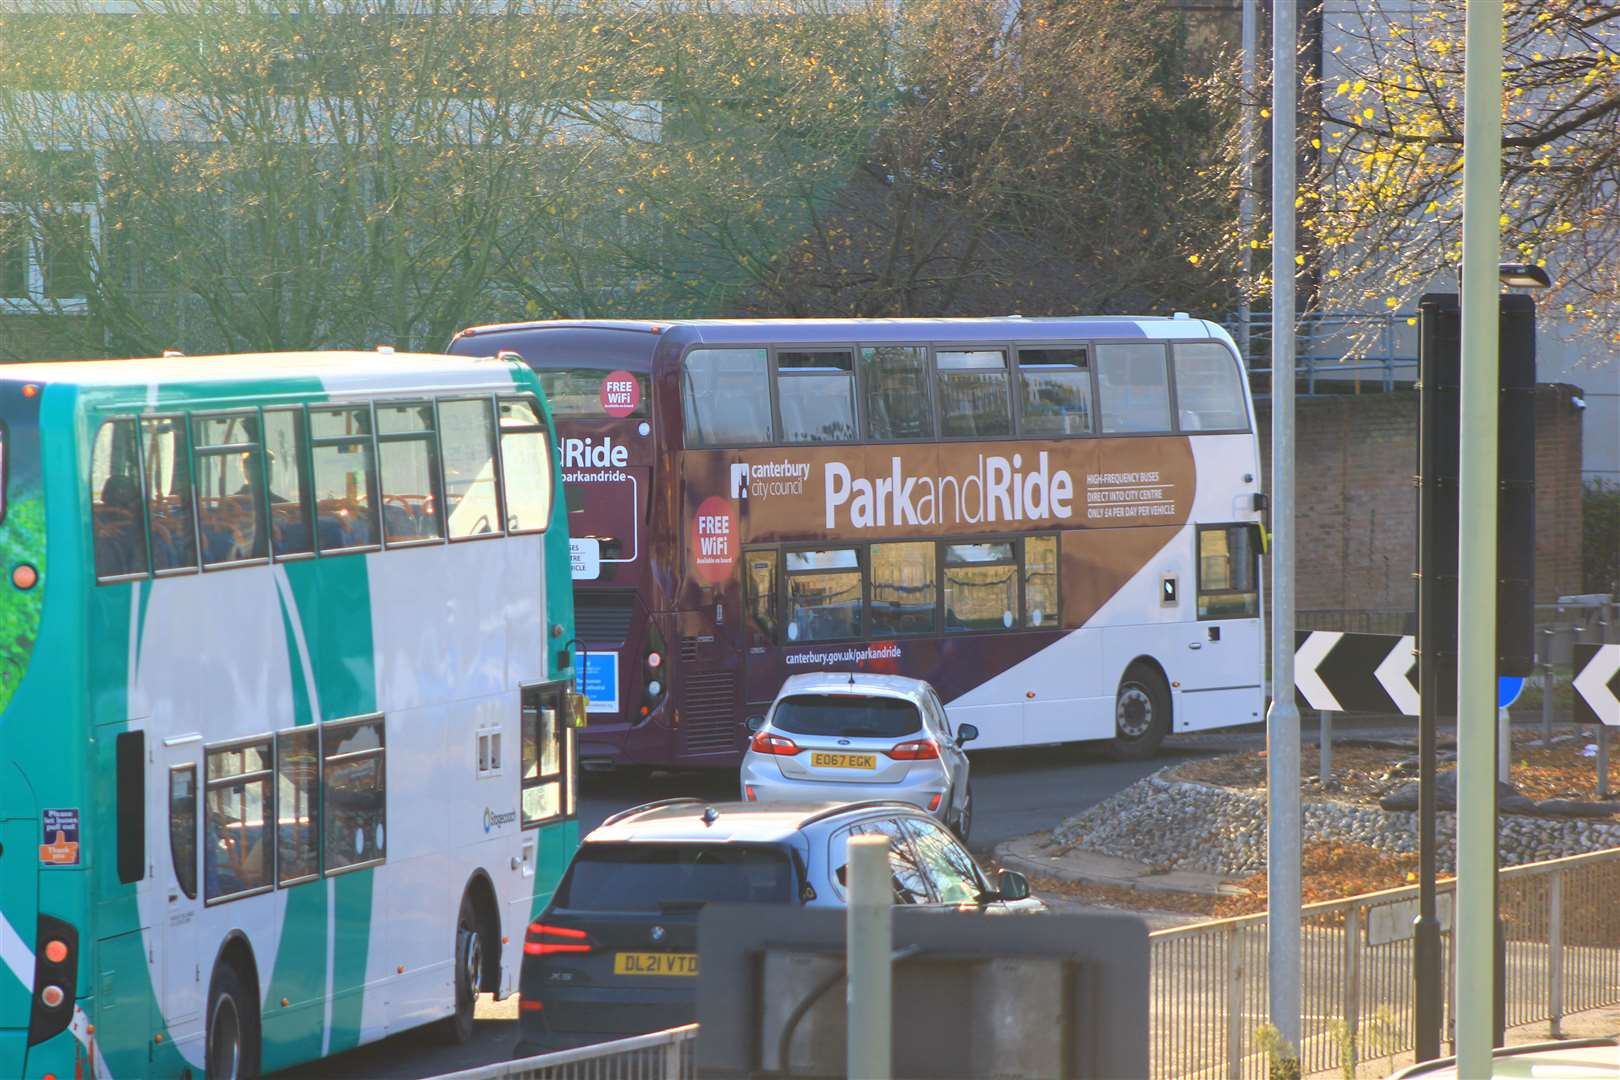 The Park and Ride bus service in Canterbury has been operating for more than 30 years